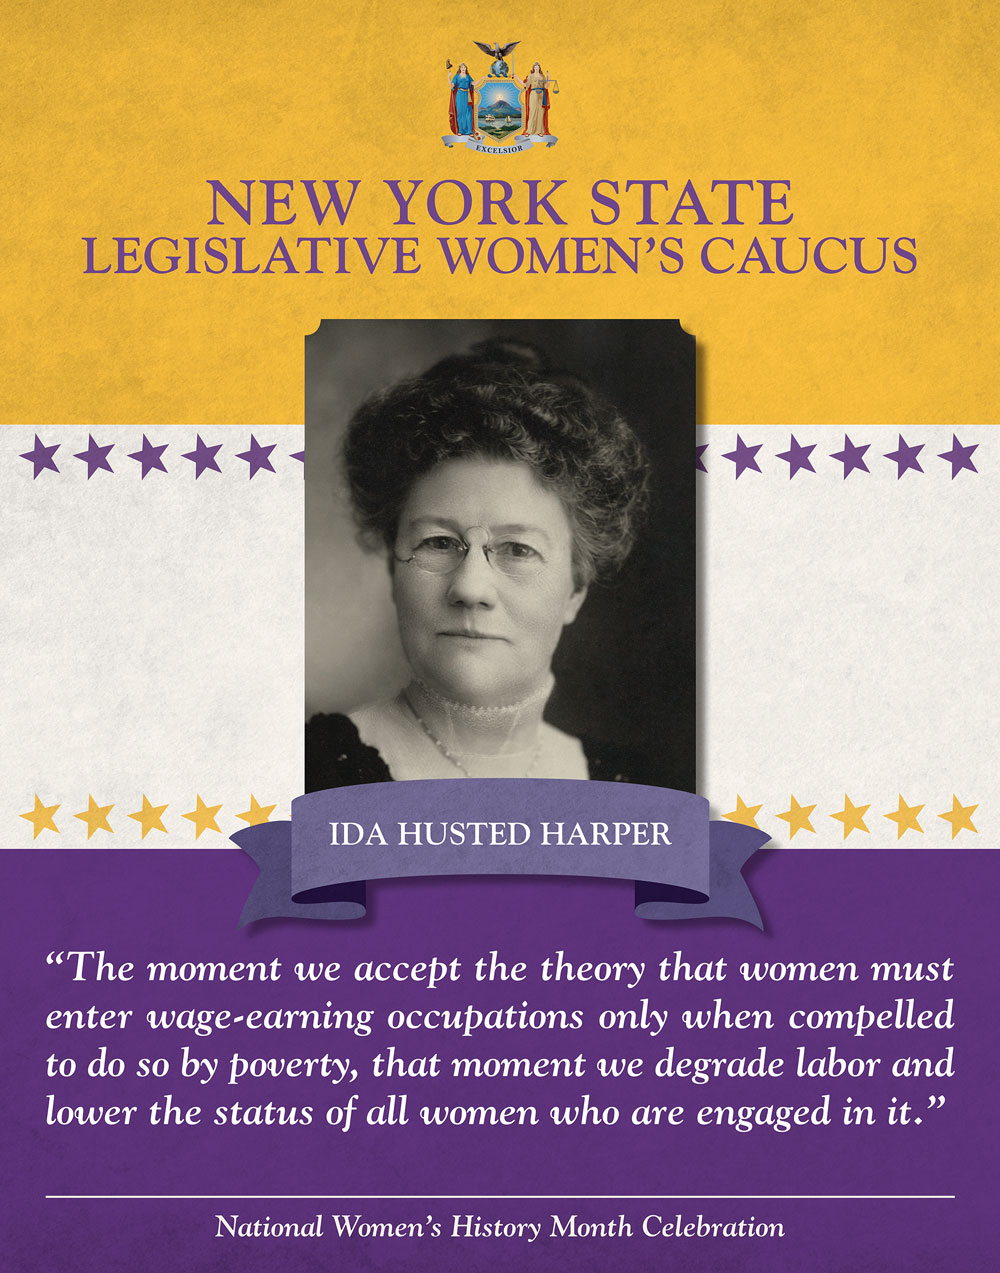 The movers and shakers of the Women’s Suffrage Movement and what they had to say about their commitment to secure enfranchisement of all American women.